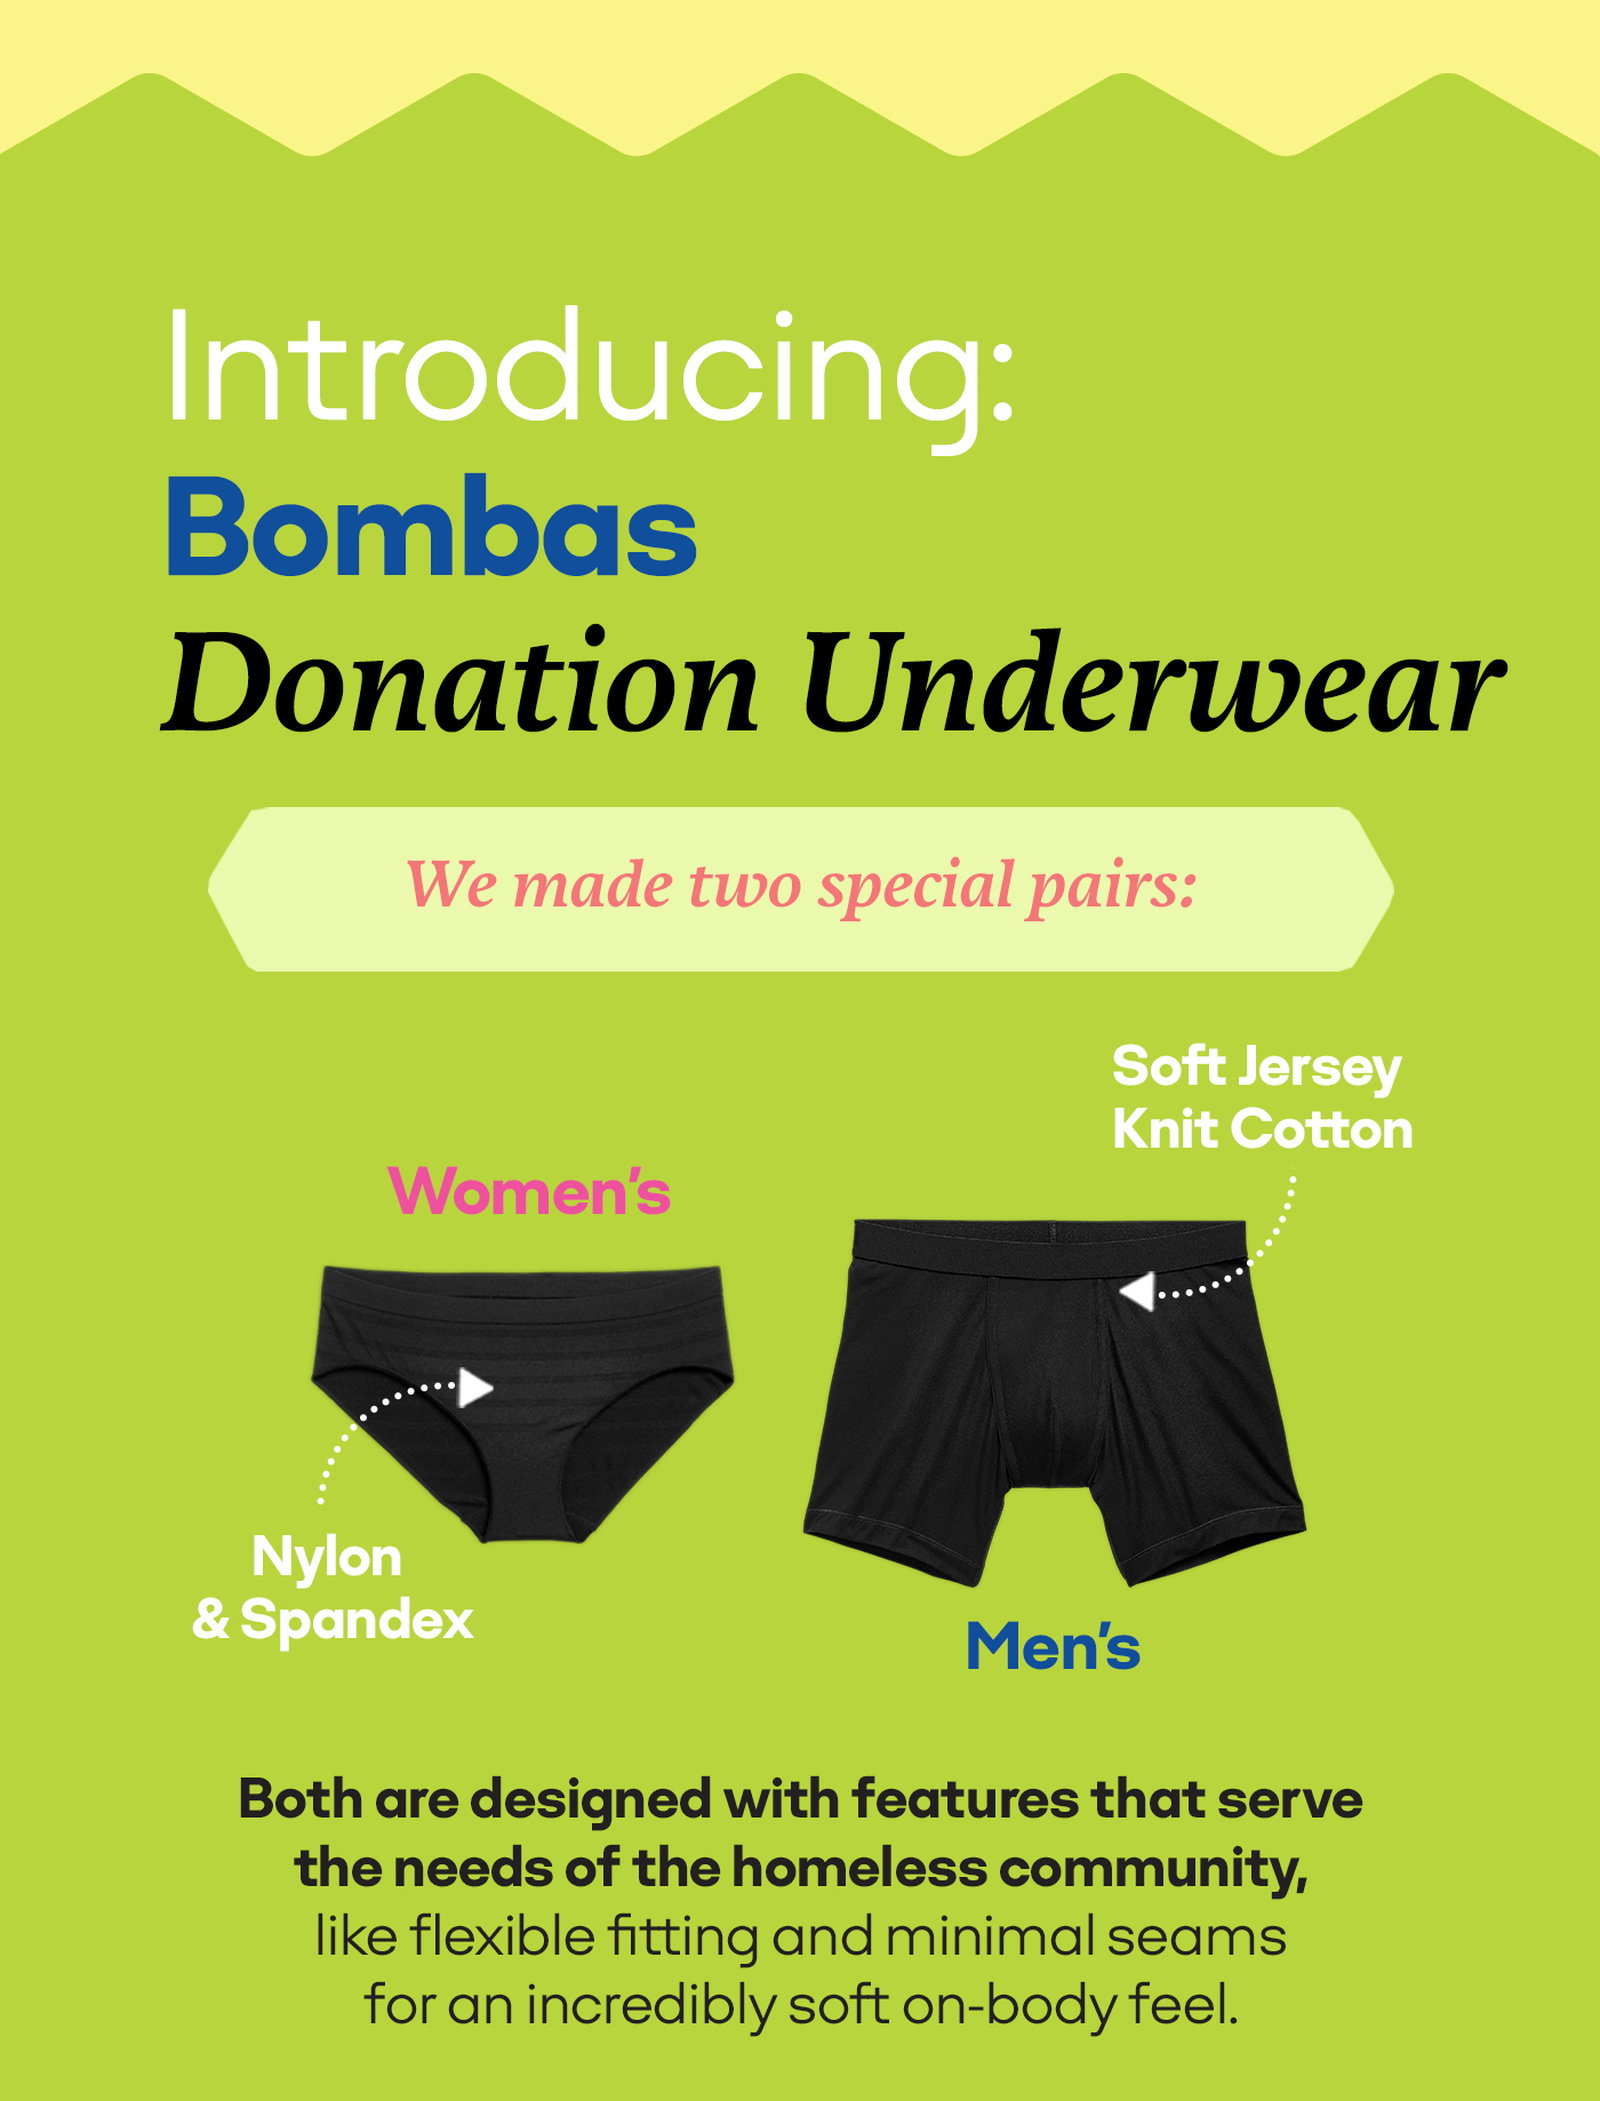 Bombas - Introducing our newest creation: Bombas Underwear: We